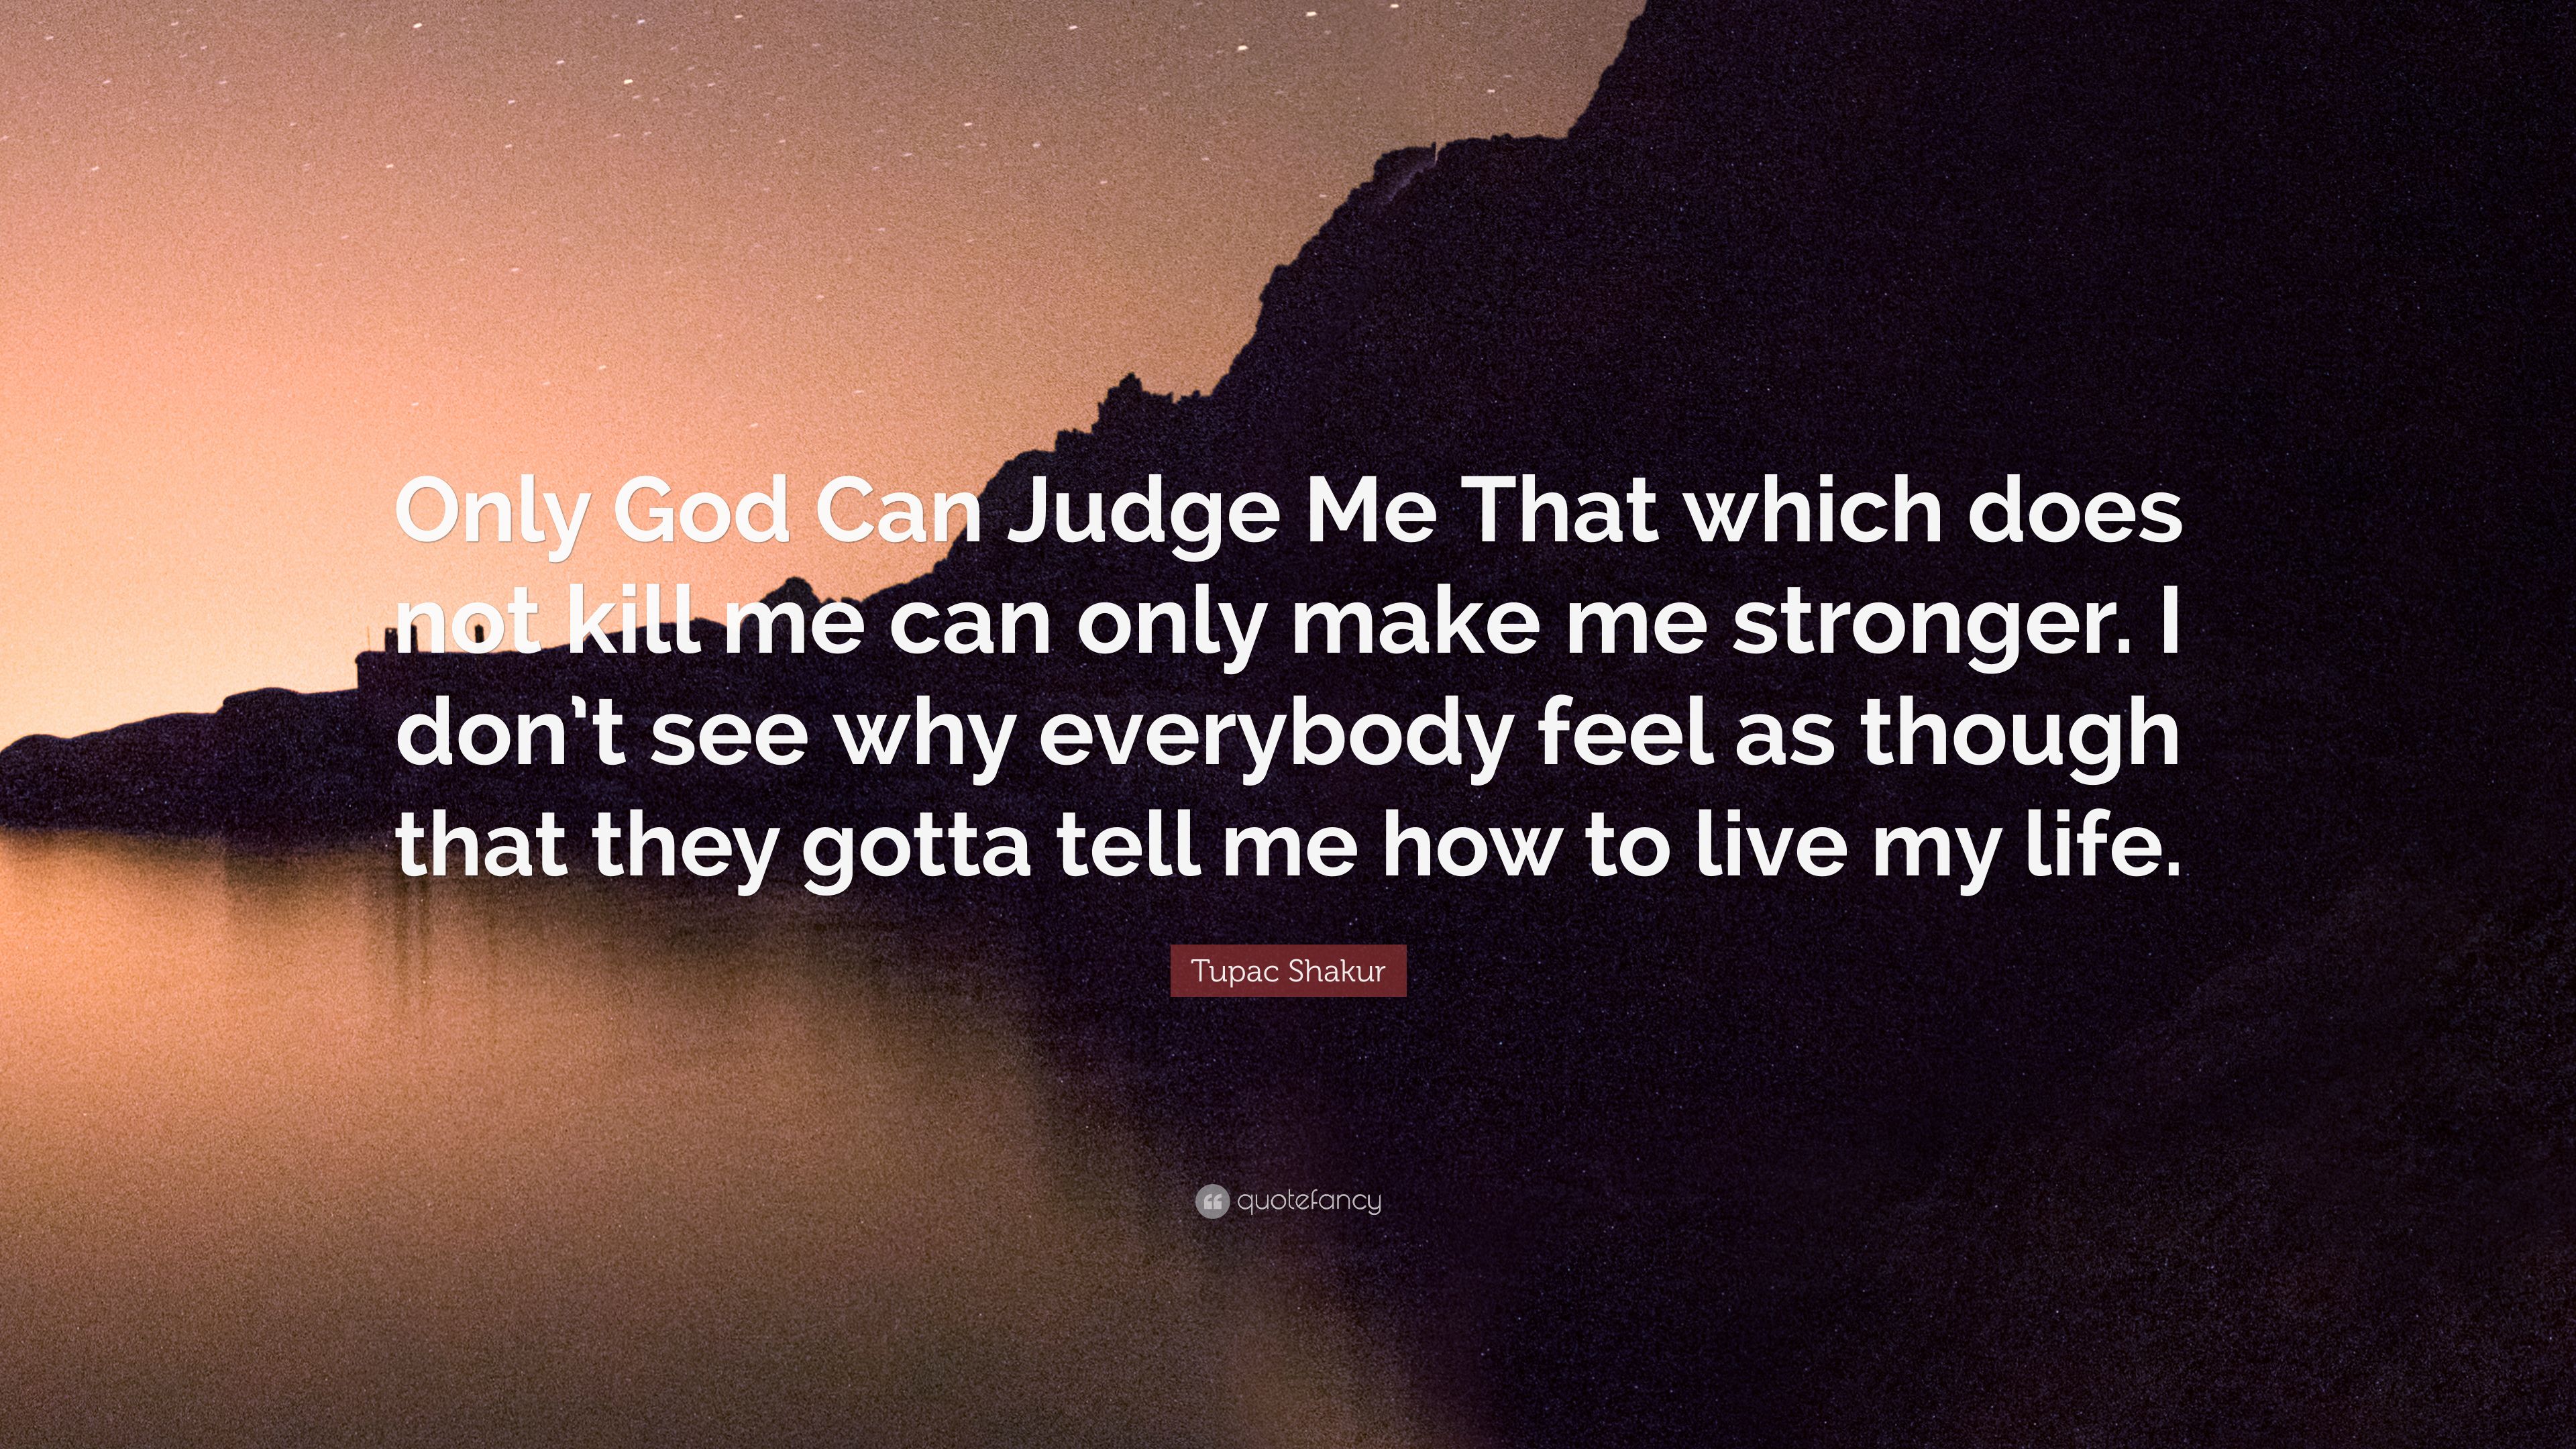 Tupac Shakur Quote: “Only God Can Judge Me That which does not